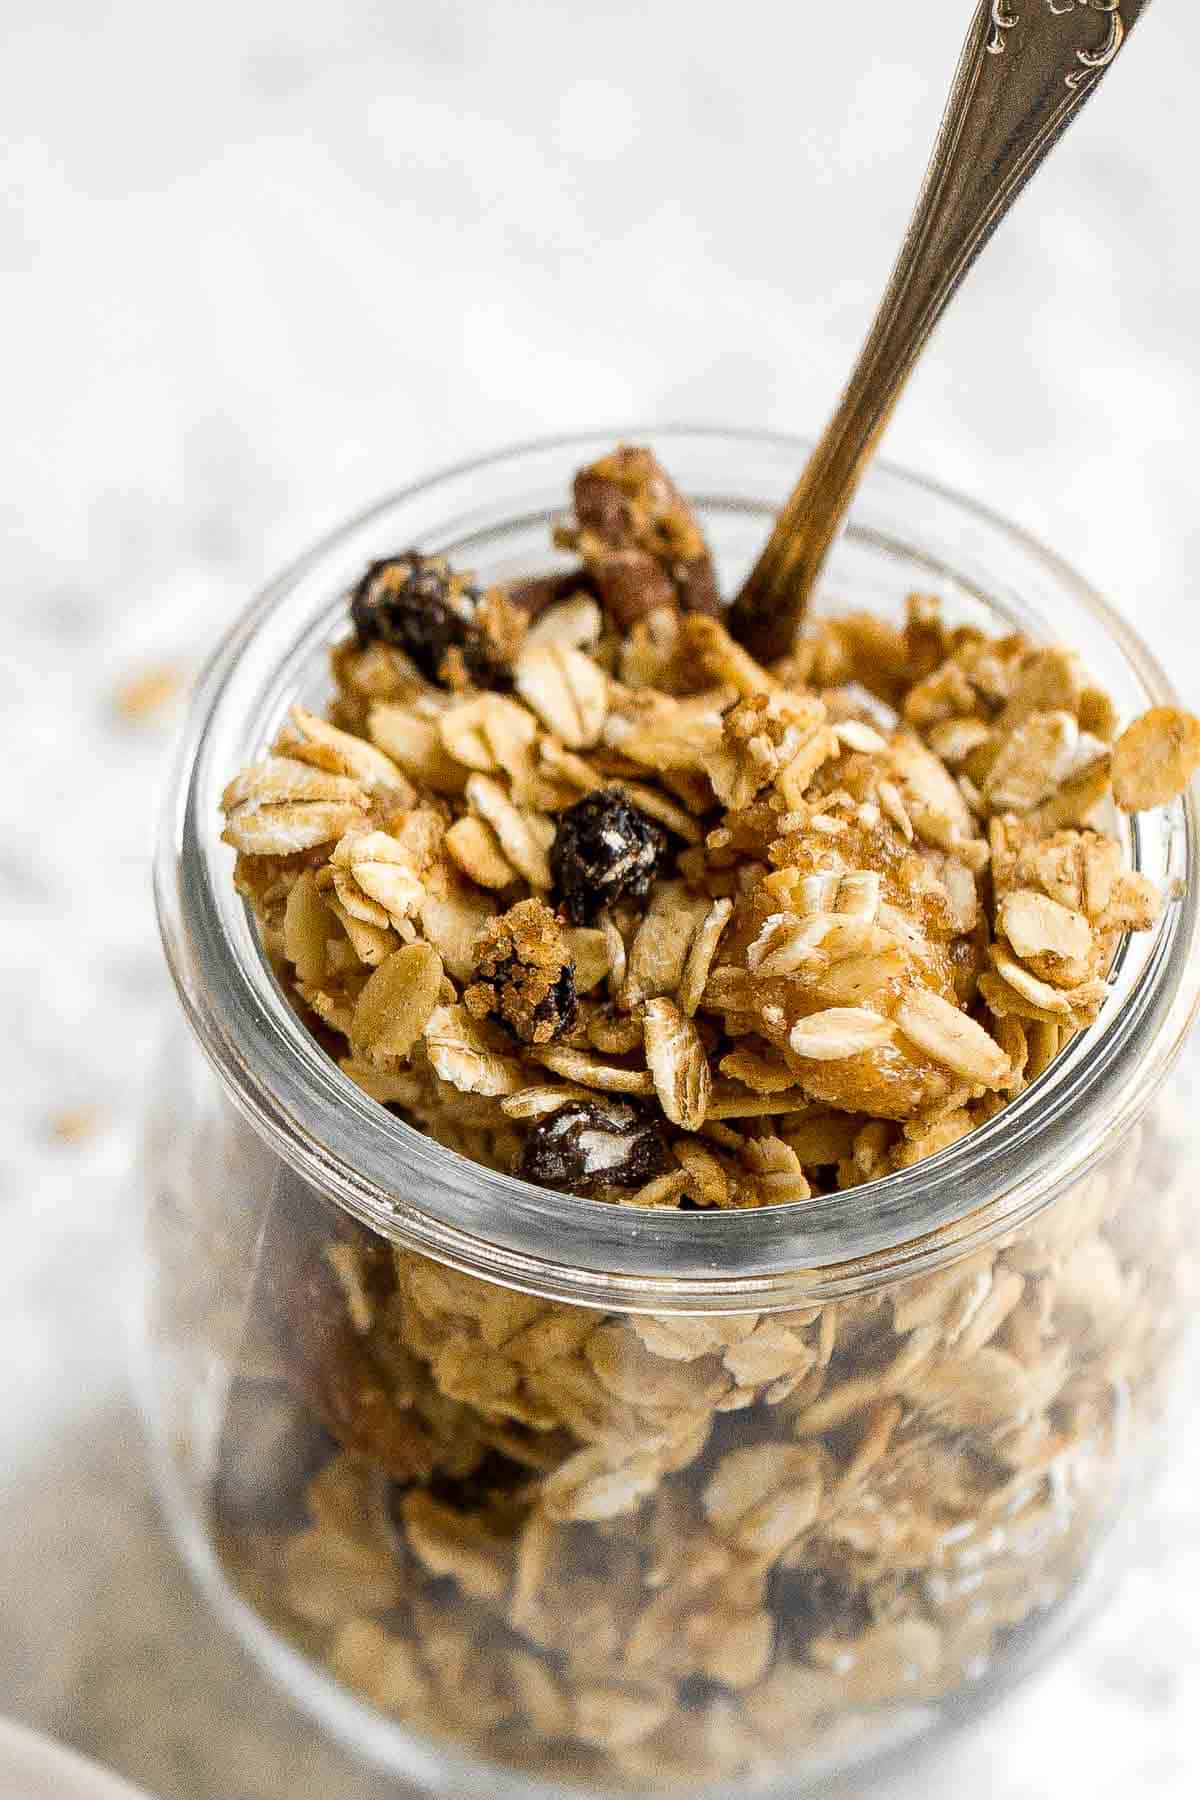 Cinnamon Apple Granola is quick and easy to make, tastes like apple pie, and is much better than store-bought — plus easier to make than you think! | aheadofthyme.com